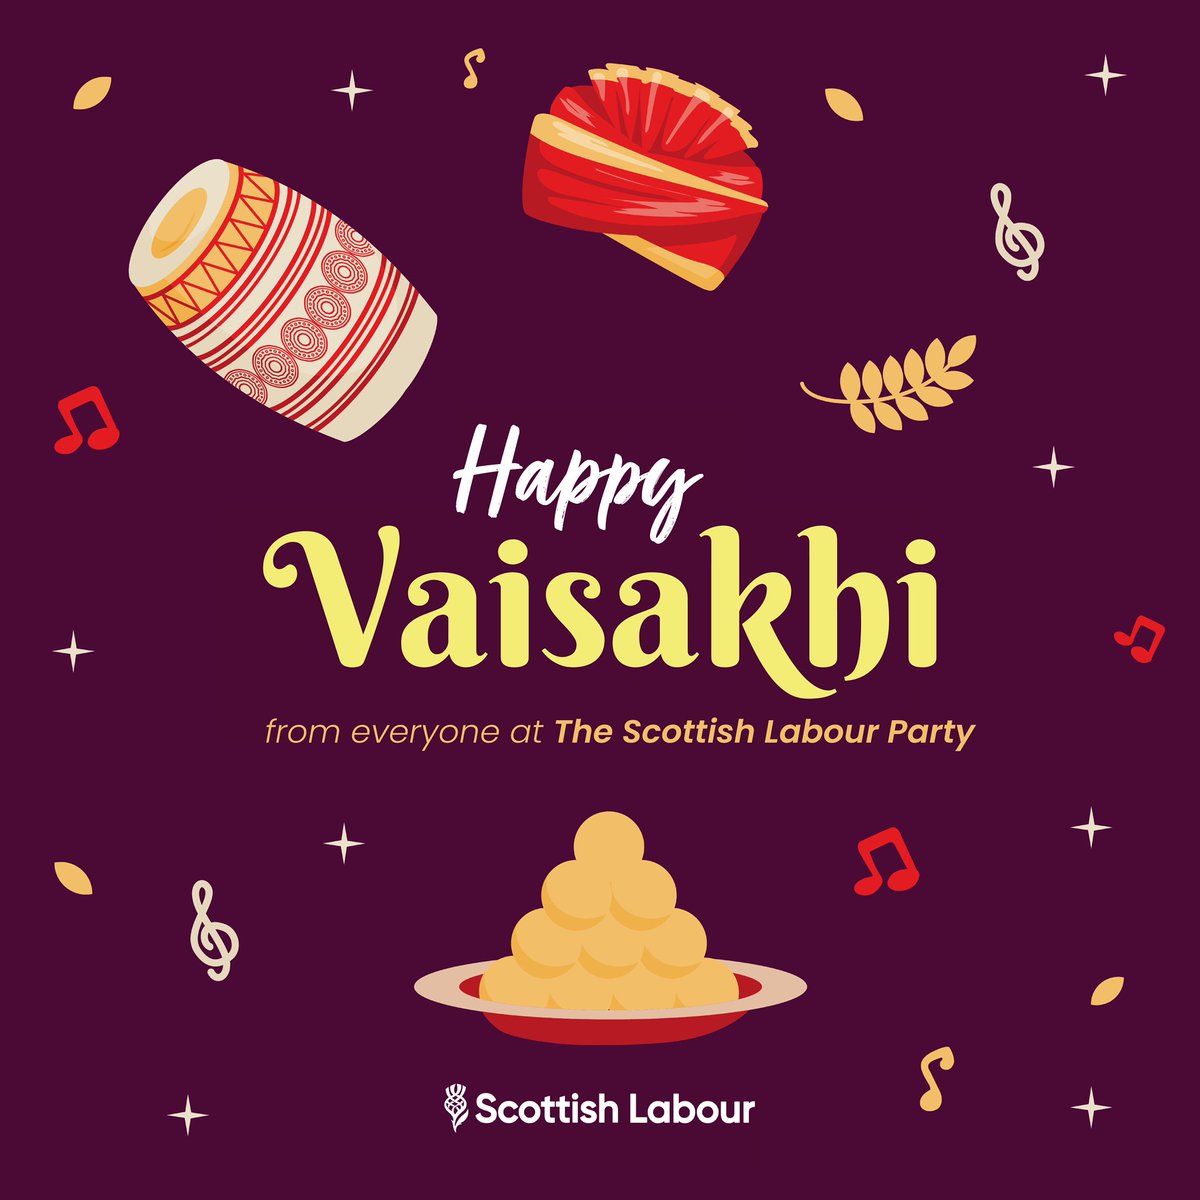 Wishing a Happy Vaisakhi to all Sikhs celebrating here in Scotland and across the world. Vaisakhi di lakh lakh vidai!